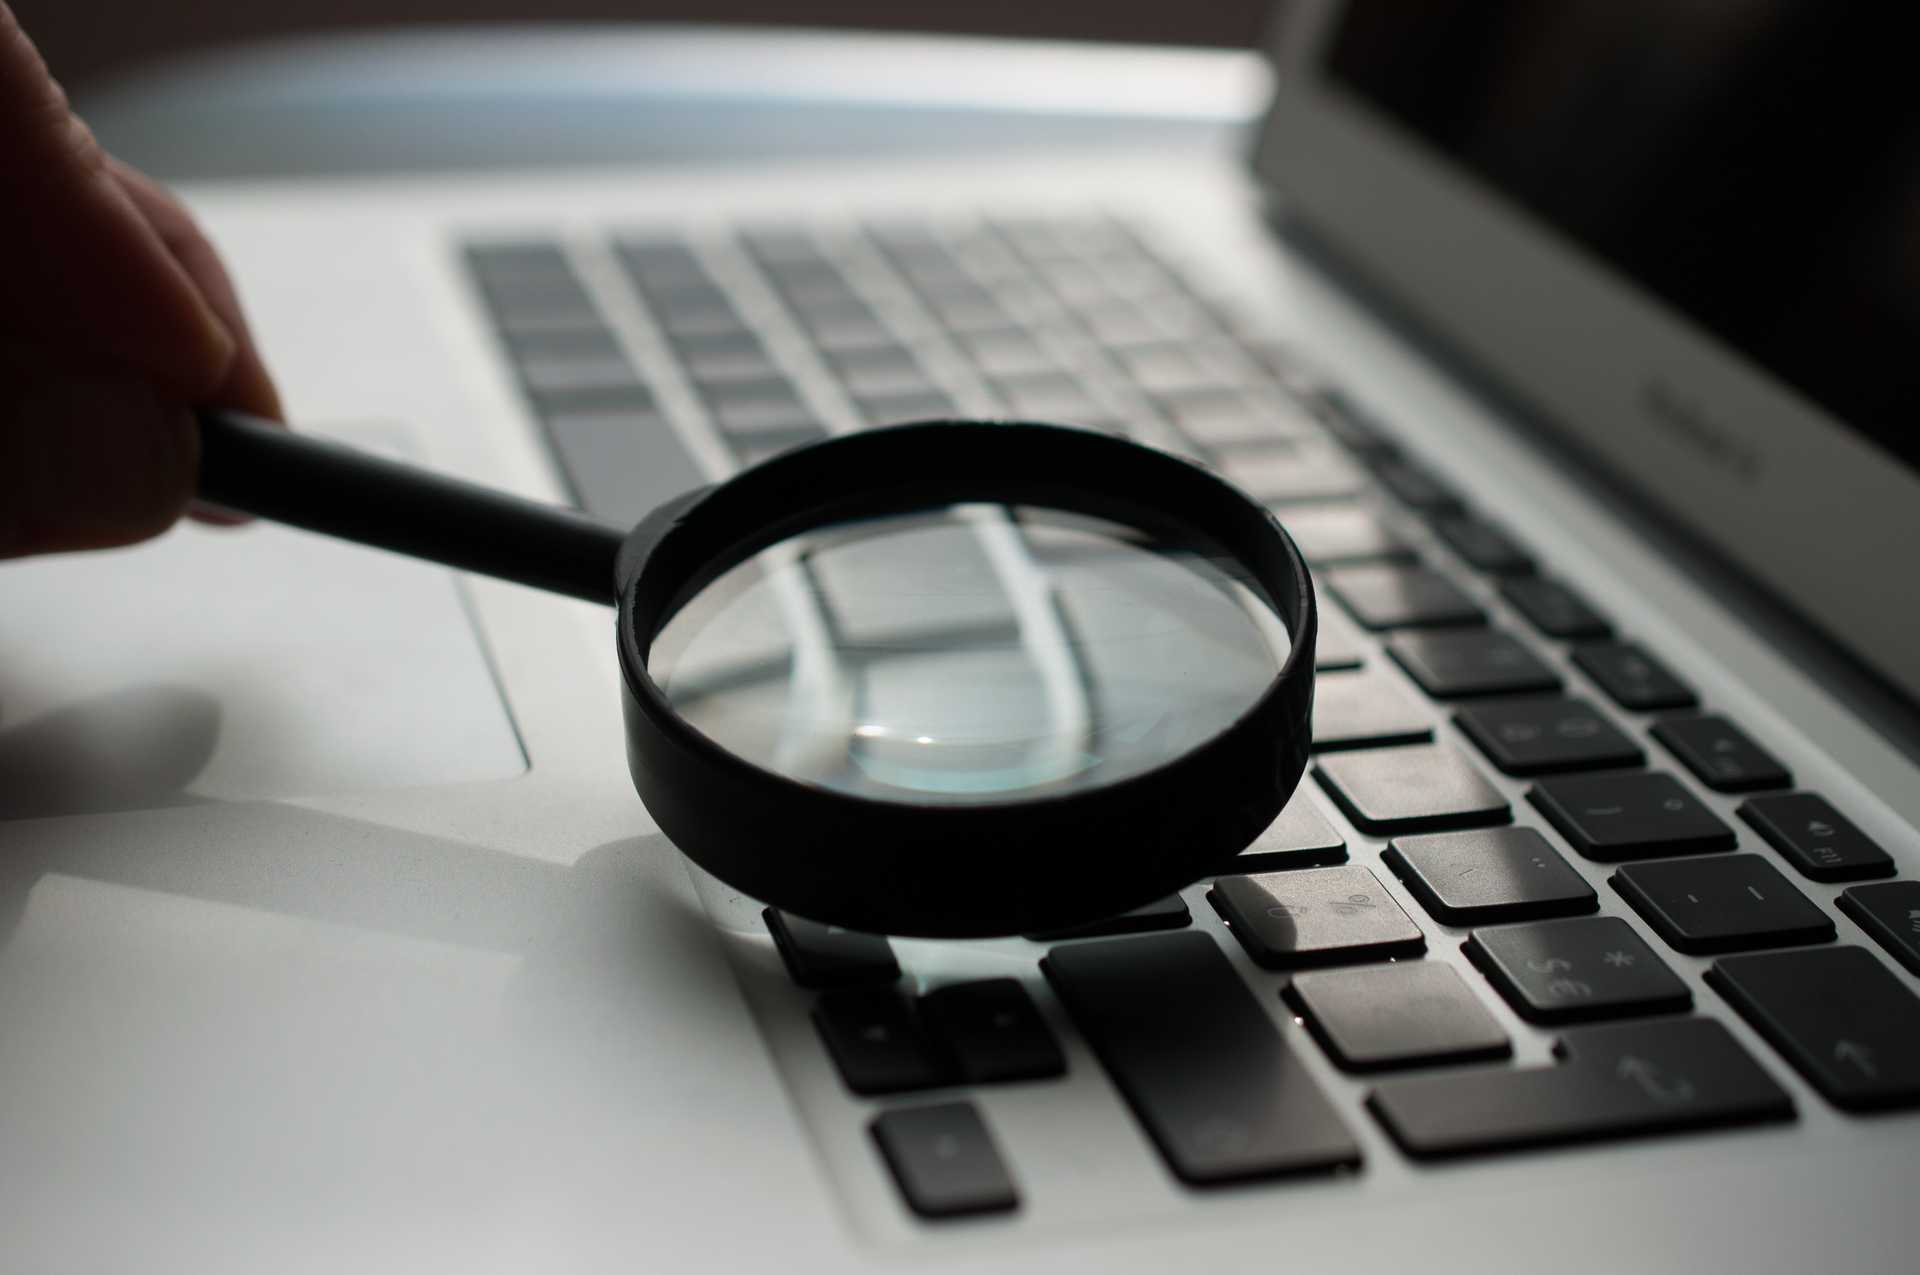 Magnifying glass hovering over a laptop keyboard